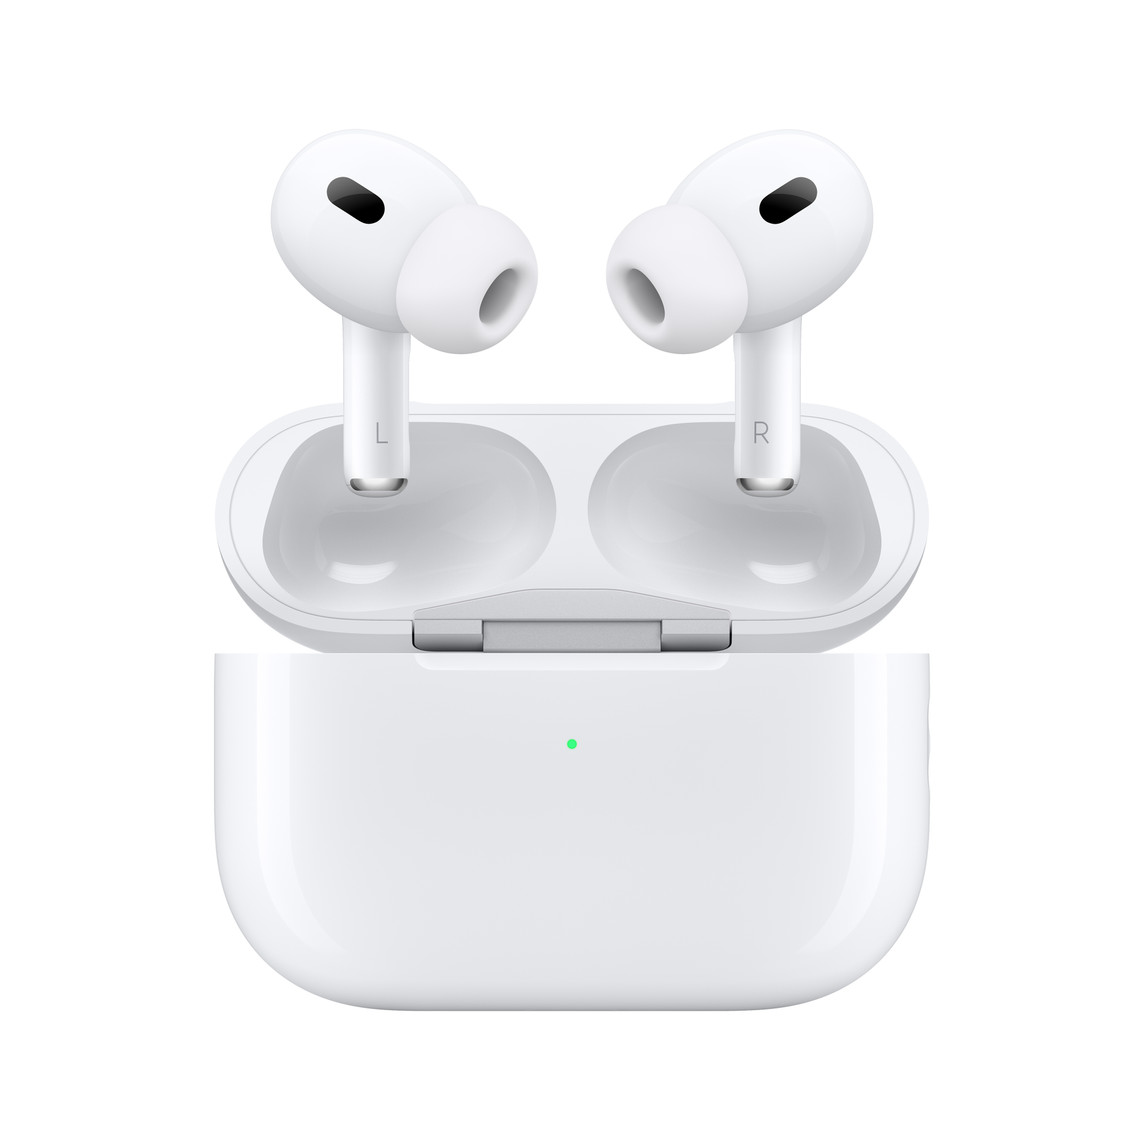 What Happens When Your AirPods Coverage Expires 11